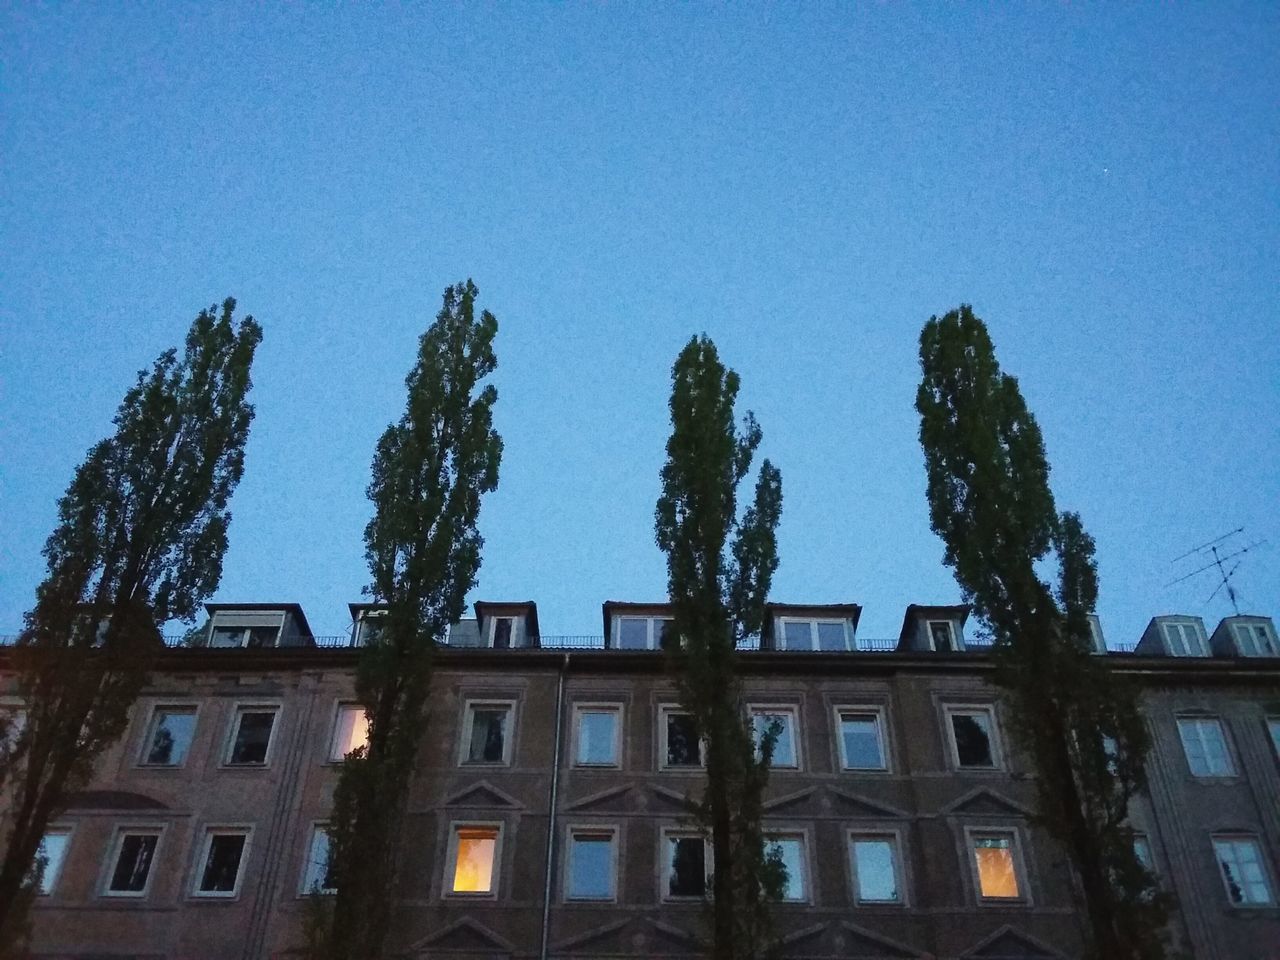 residential building behind poplars. · Munich München germany buildings Architecture urban landscape poplar Trees trees and sky tree crowns dusk nightfall blue Light apartment lights